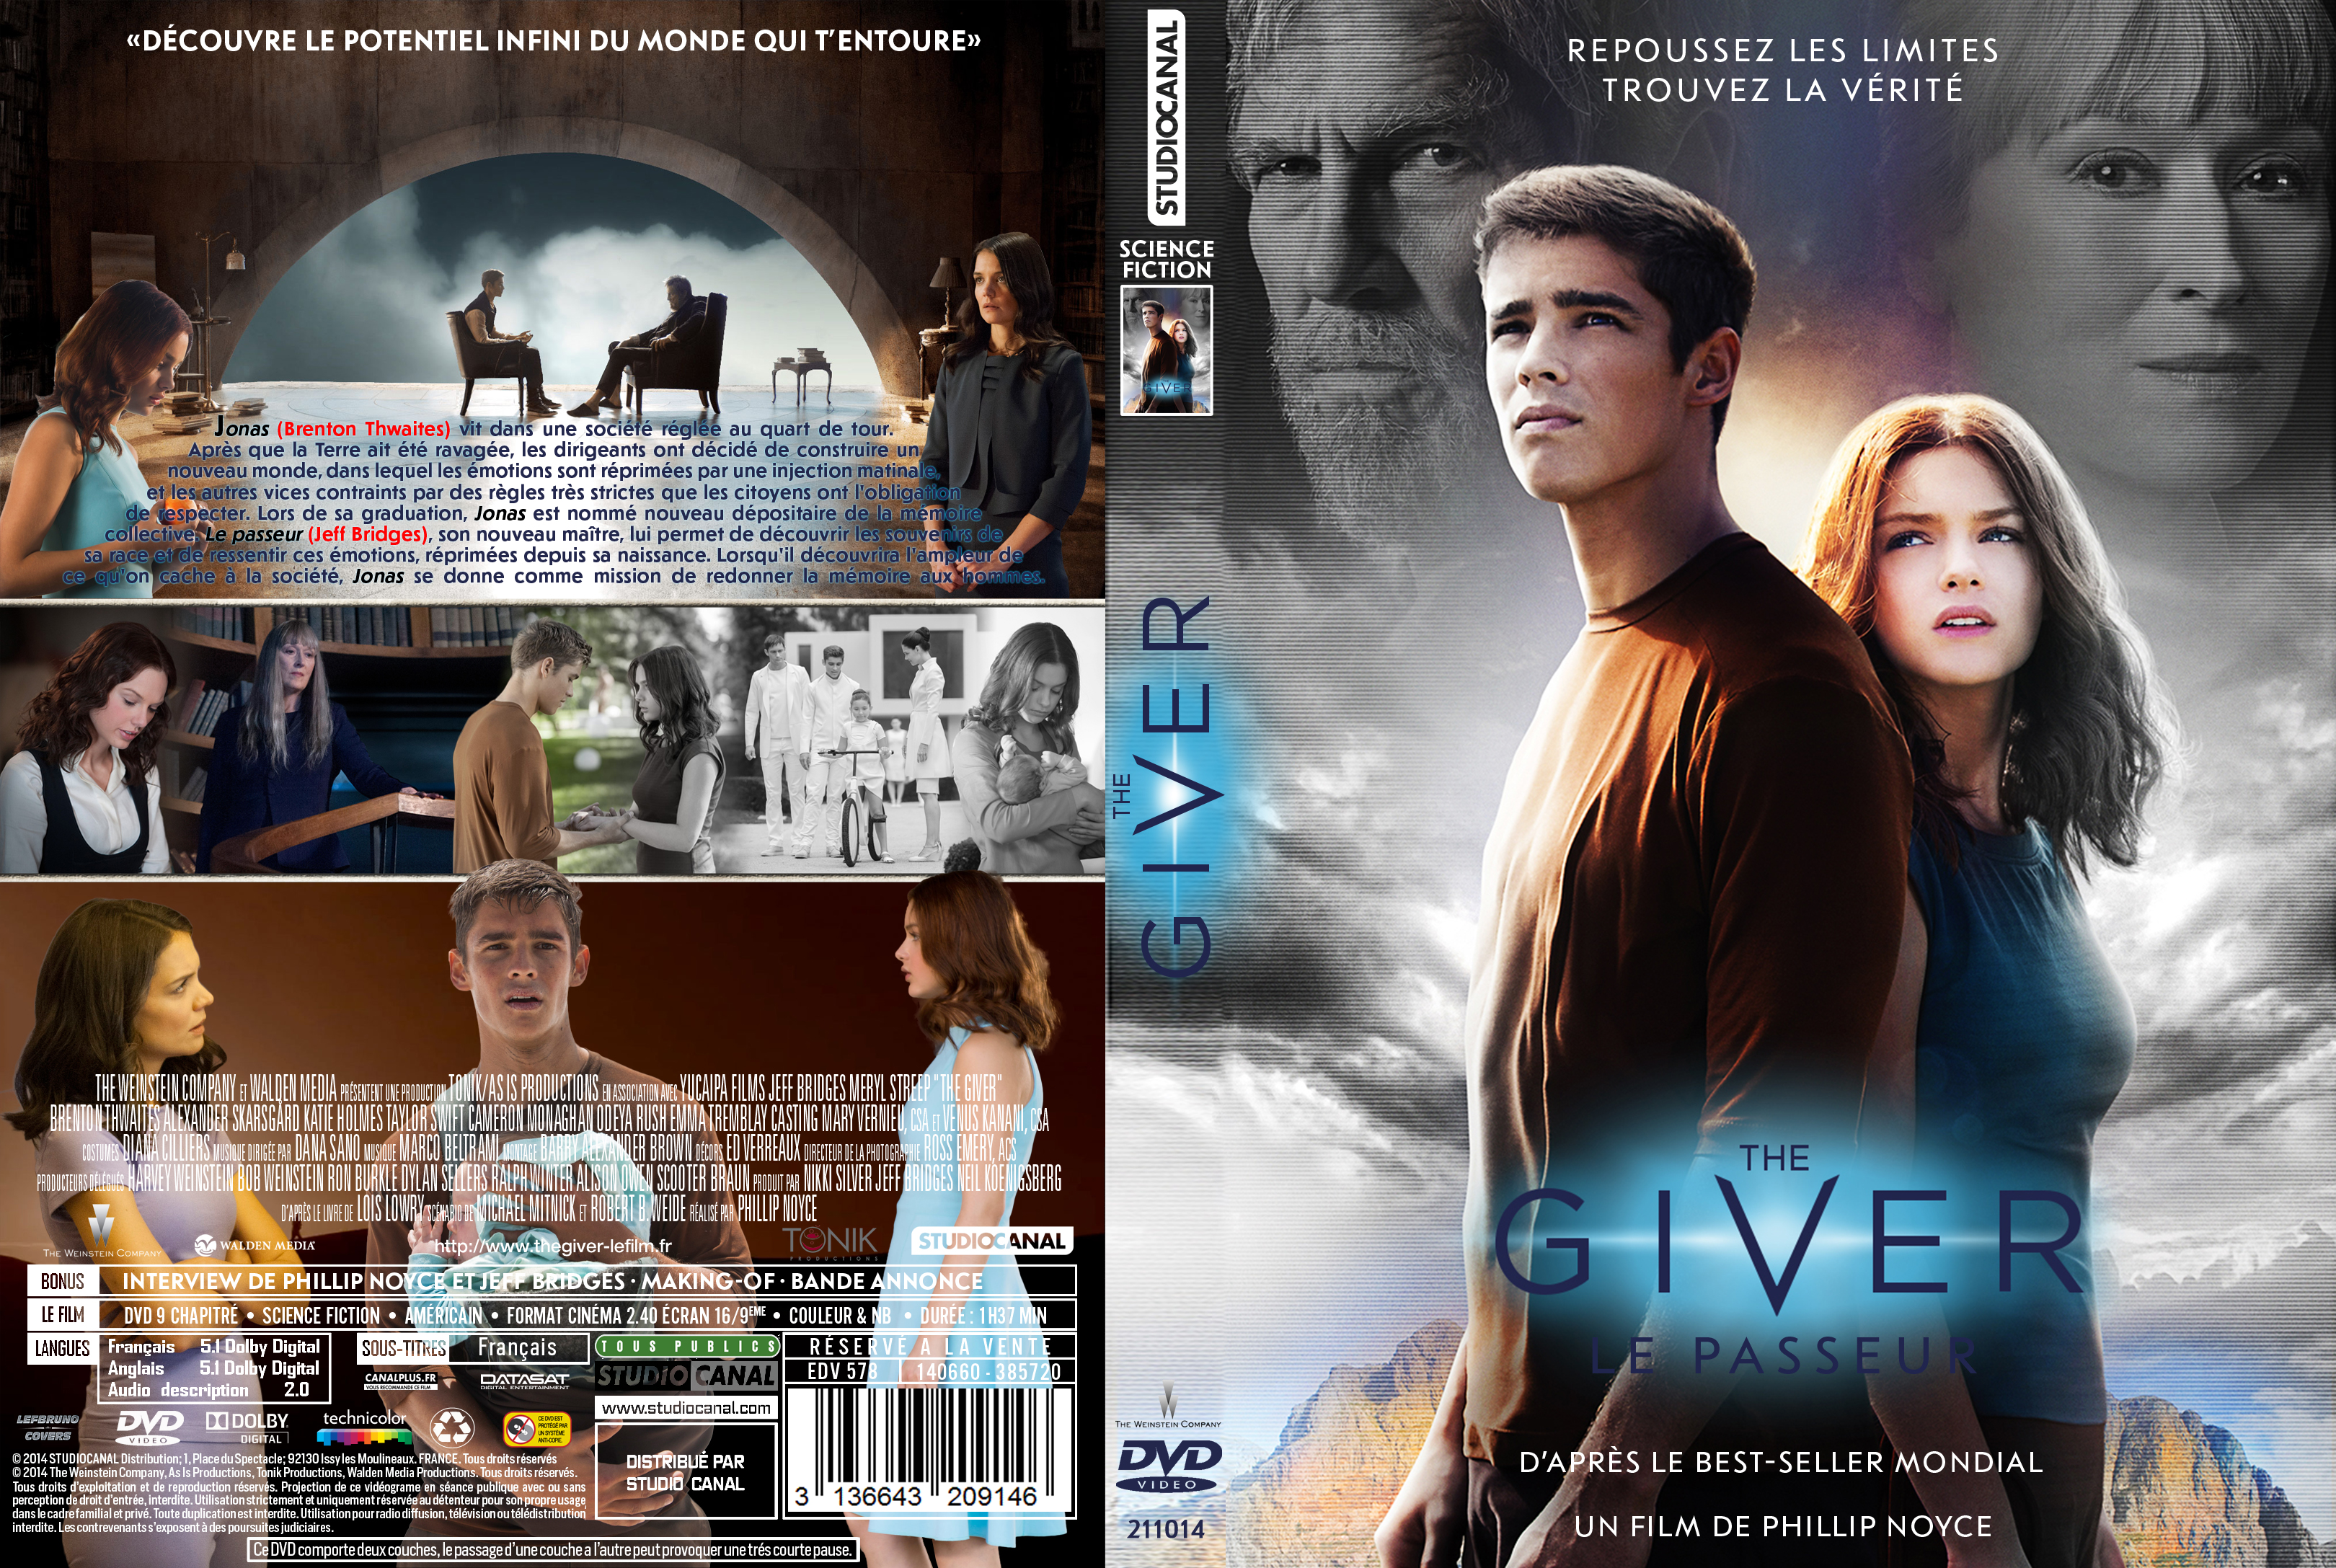 Jaquette DVD The Giver custom